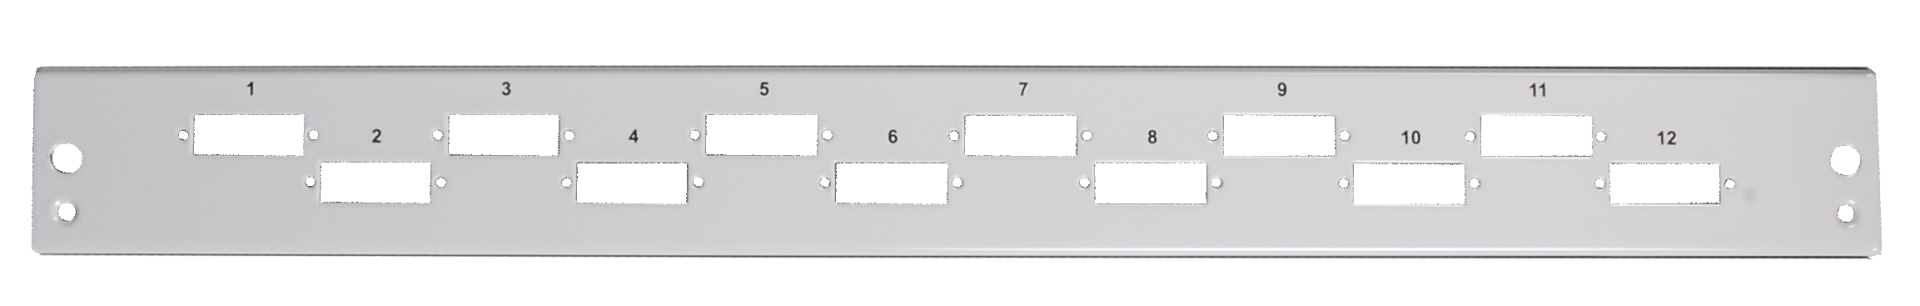 Front Panel 1U 24 ST dpx